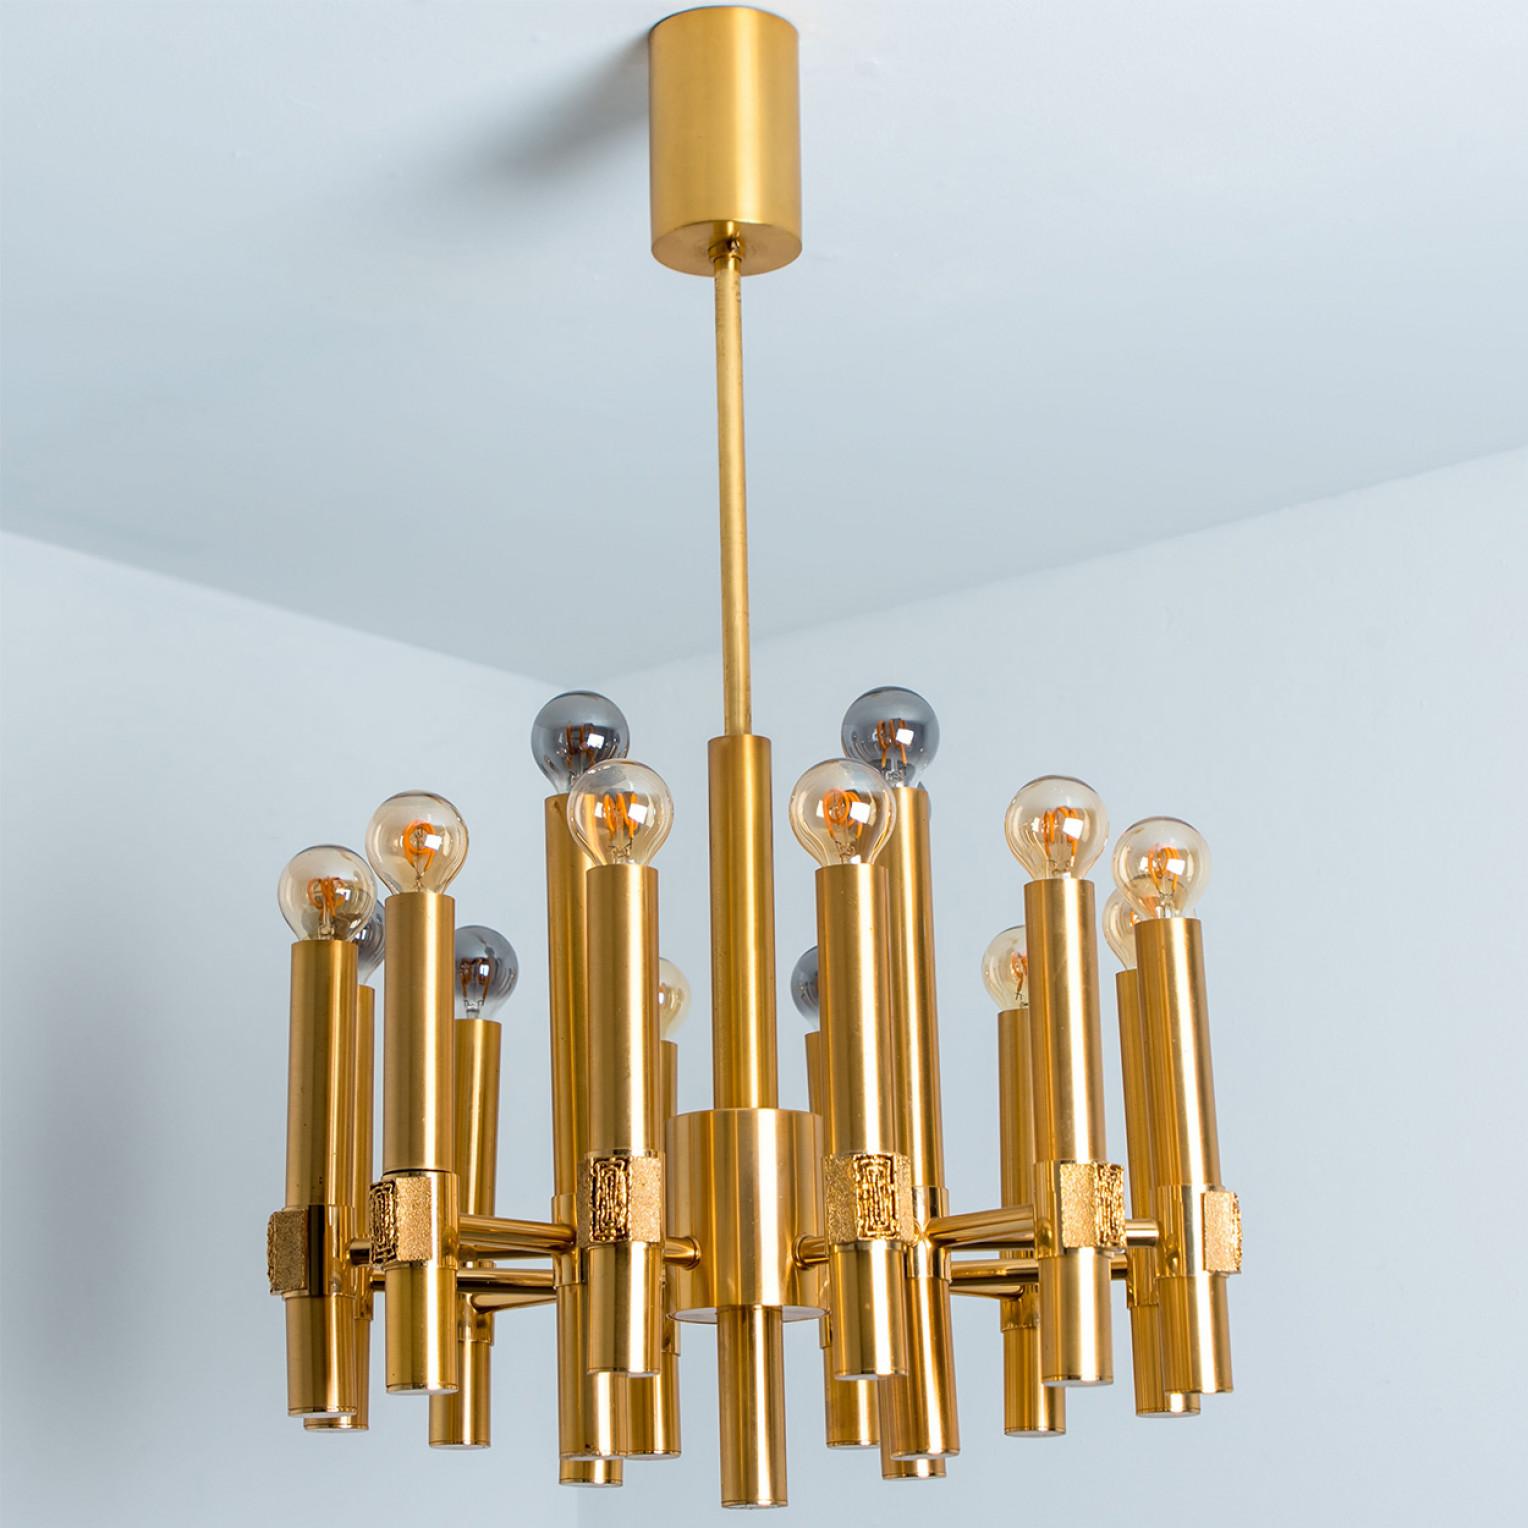 Beautiful chandelier by Angelo Brotto for Esperia Italia, brass ramified structure with 16 arms.
The arms in the second row are slightly leaning outward.

Dimensions:
Height: 27.55